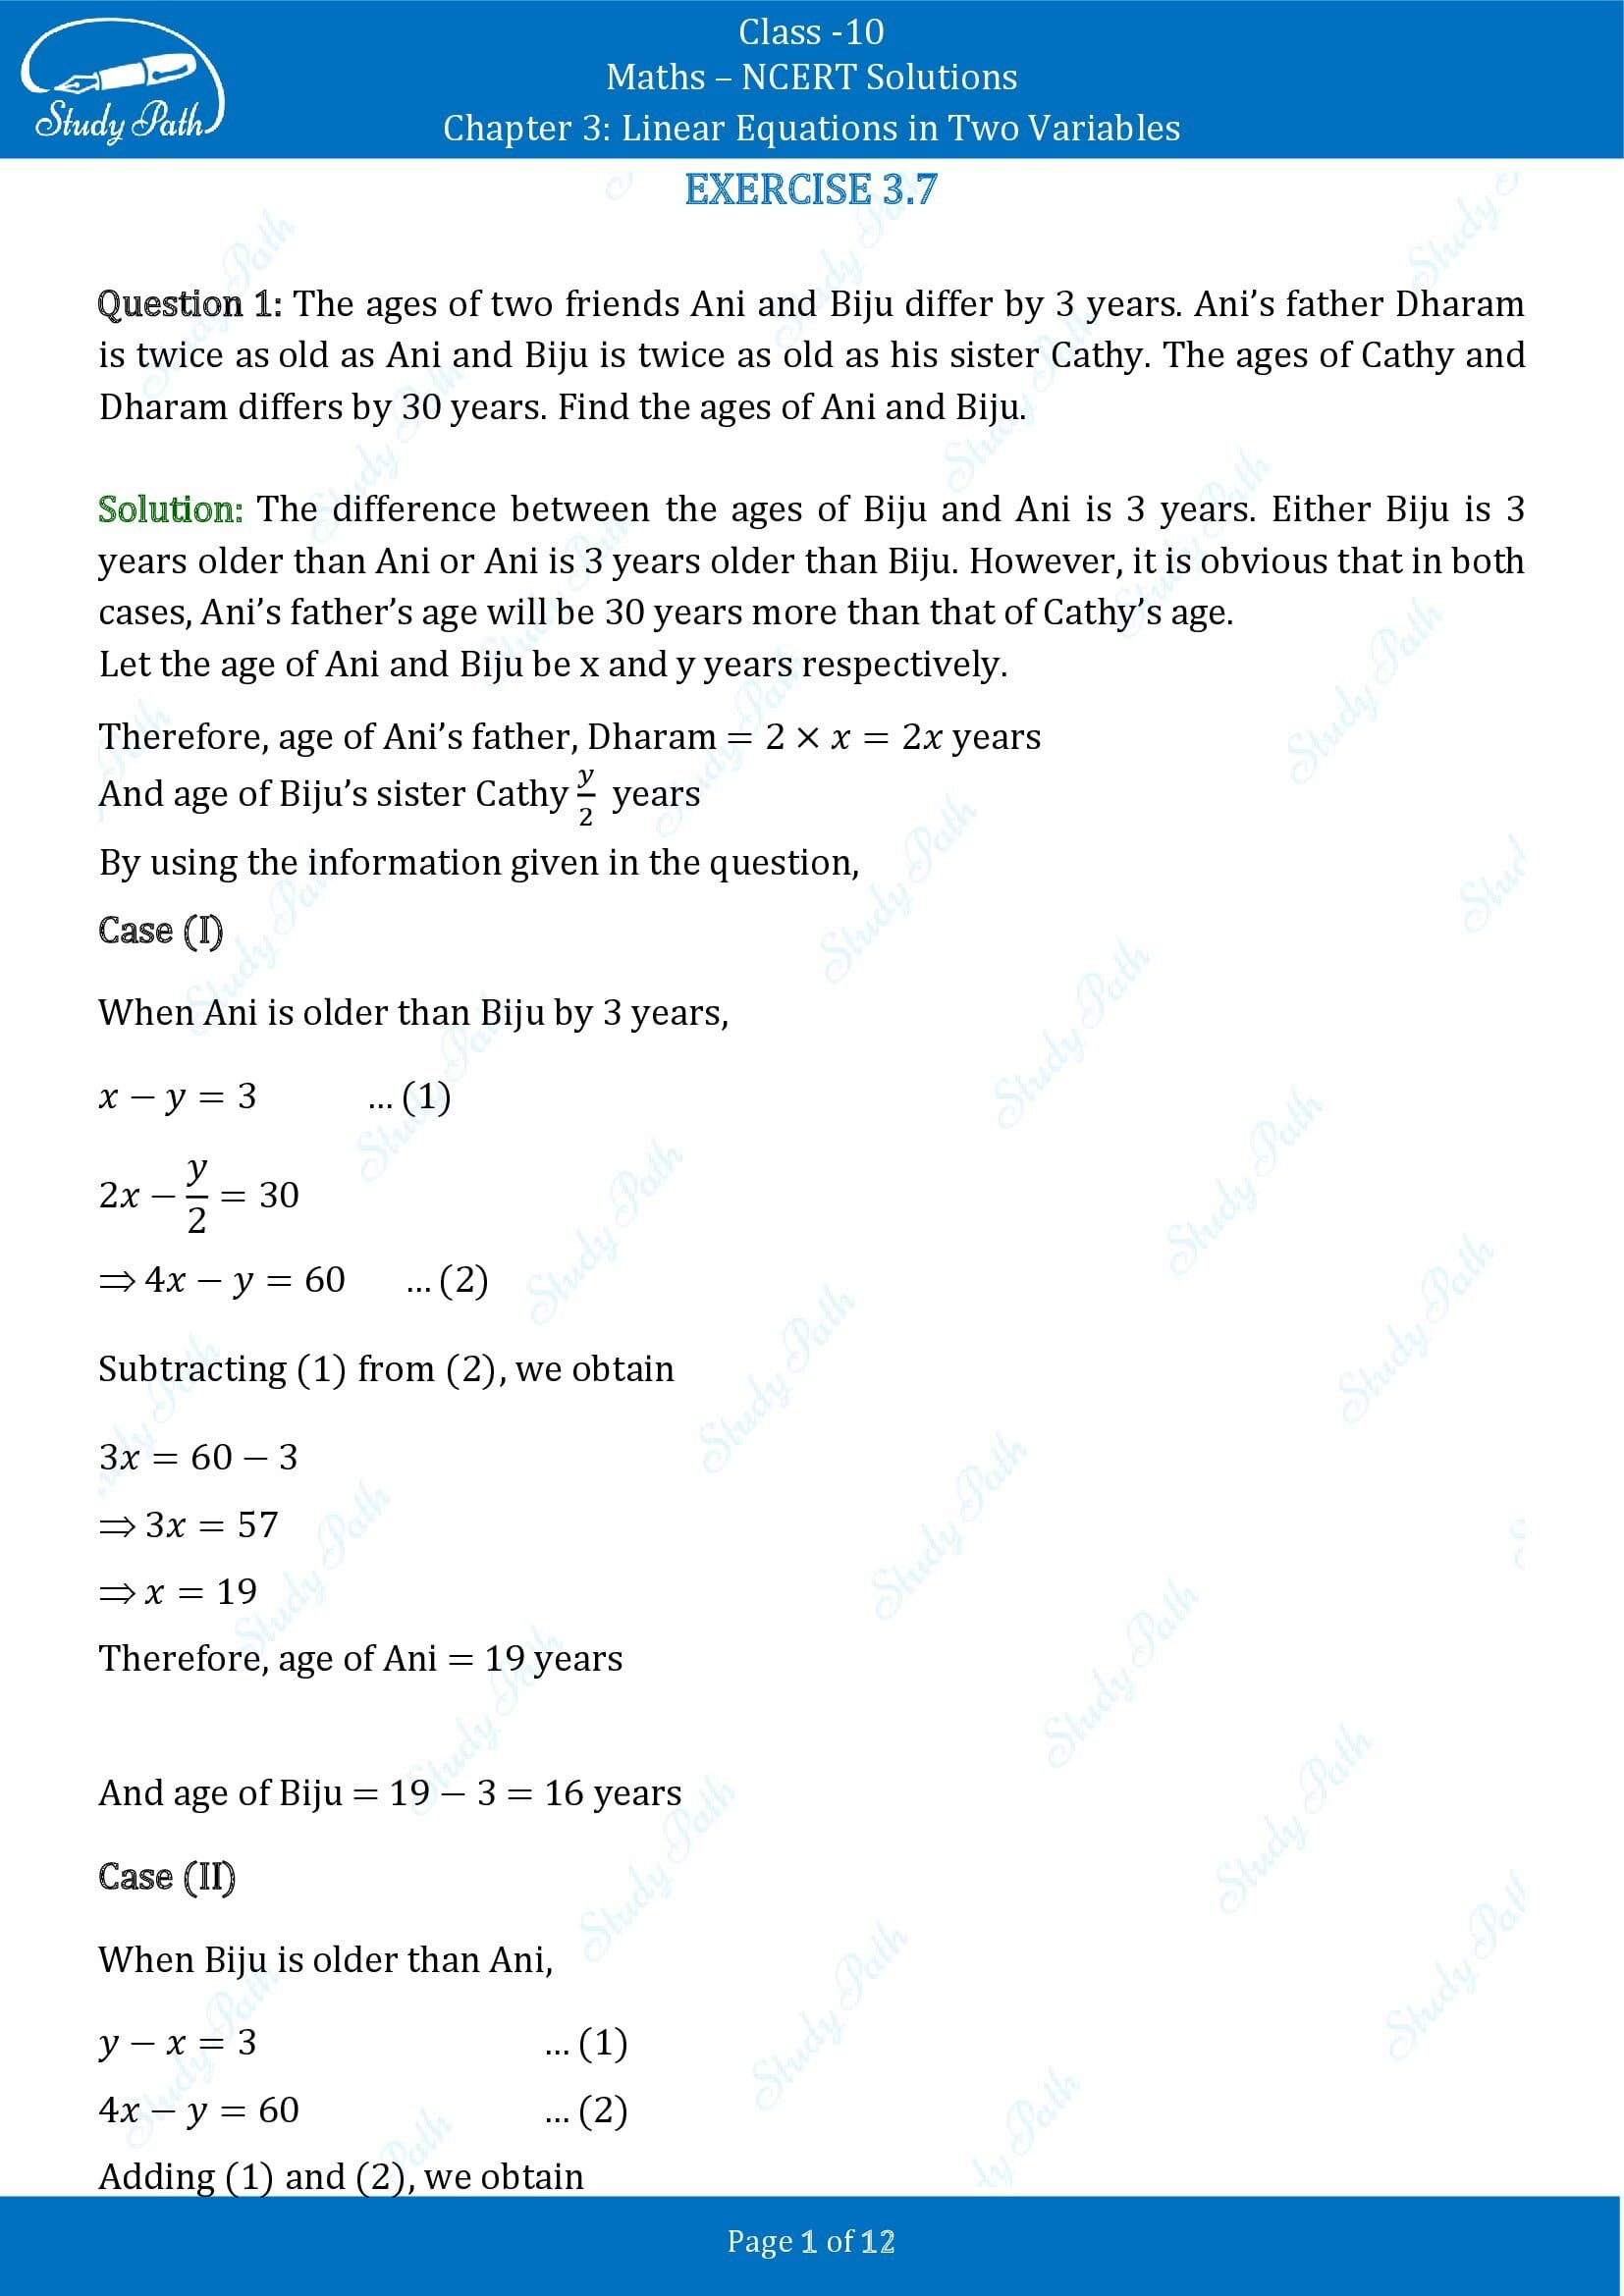 NCERT Solutions for Class 10 Maths Chapter 3 Linear Equations in Two Variables Exercise 3.7 00001